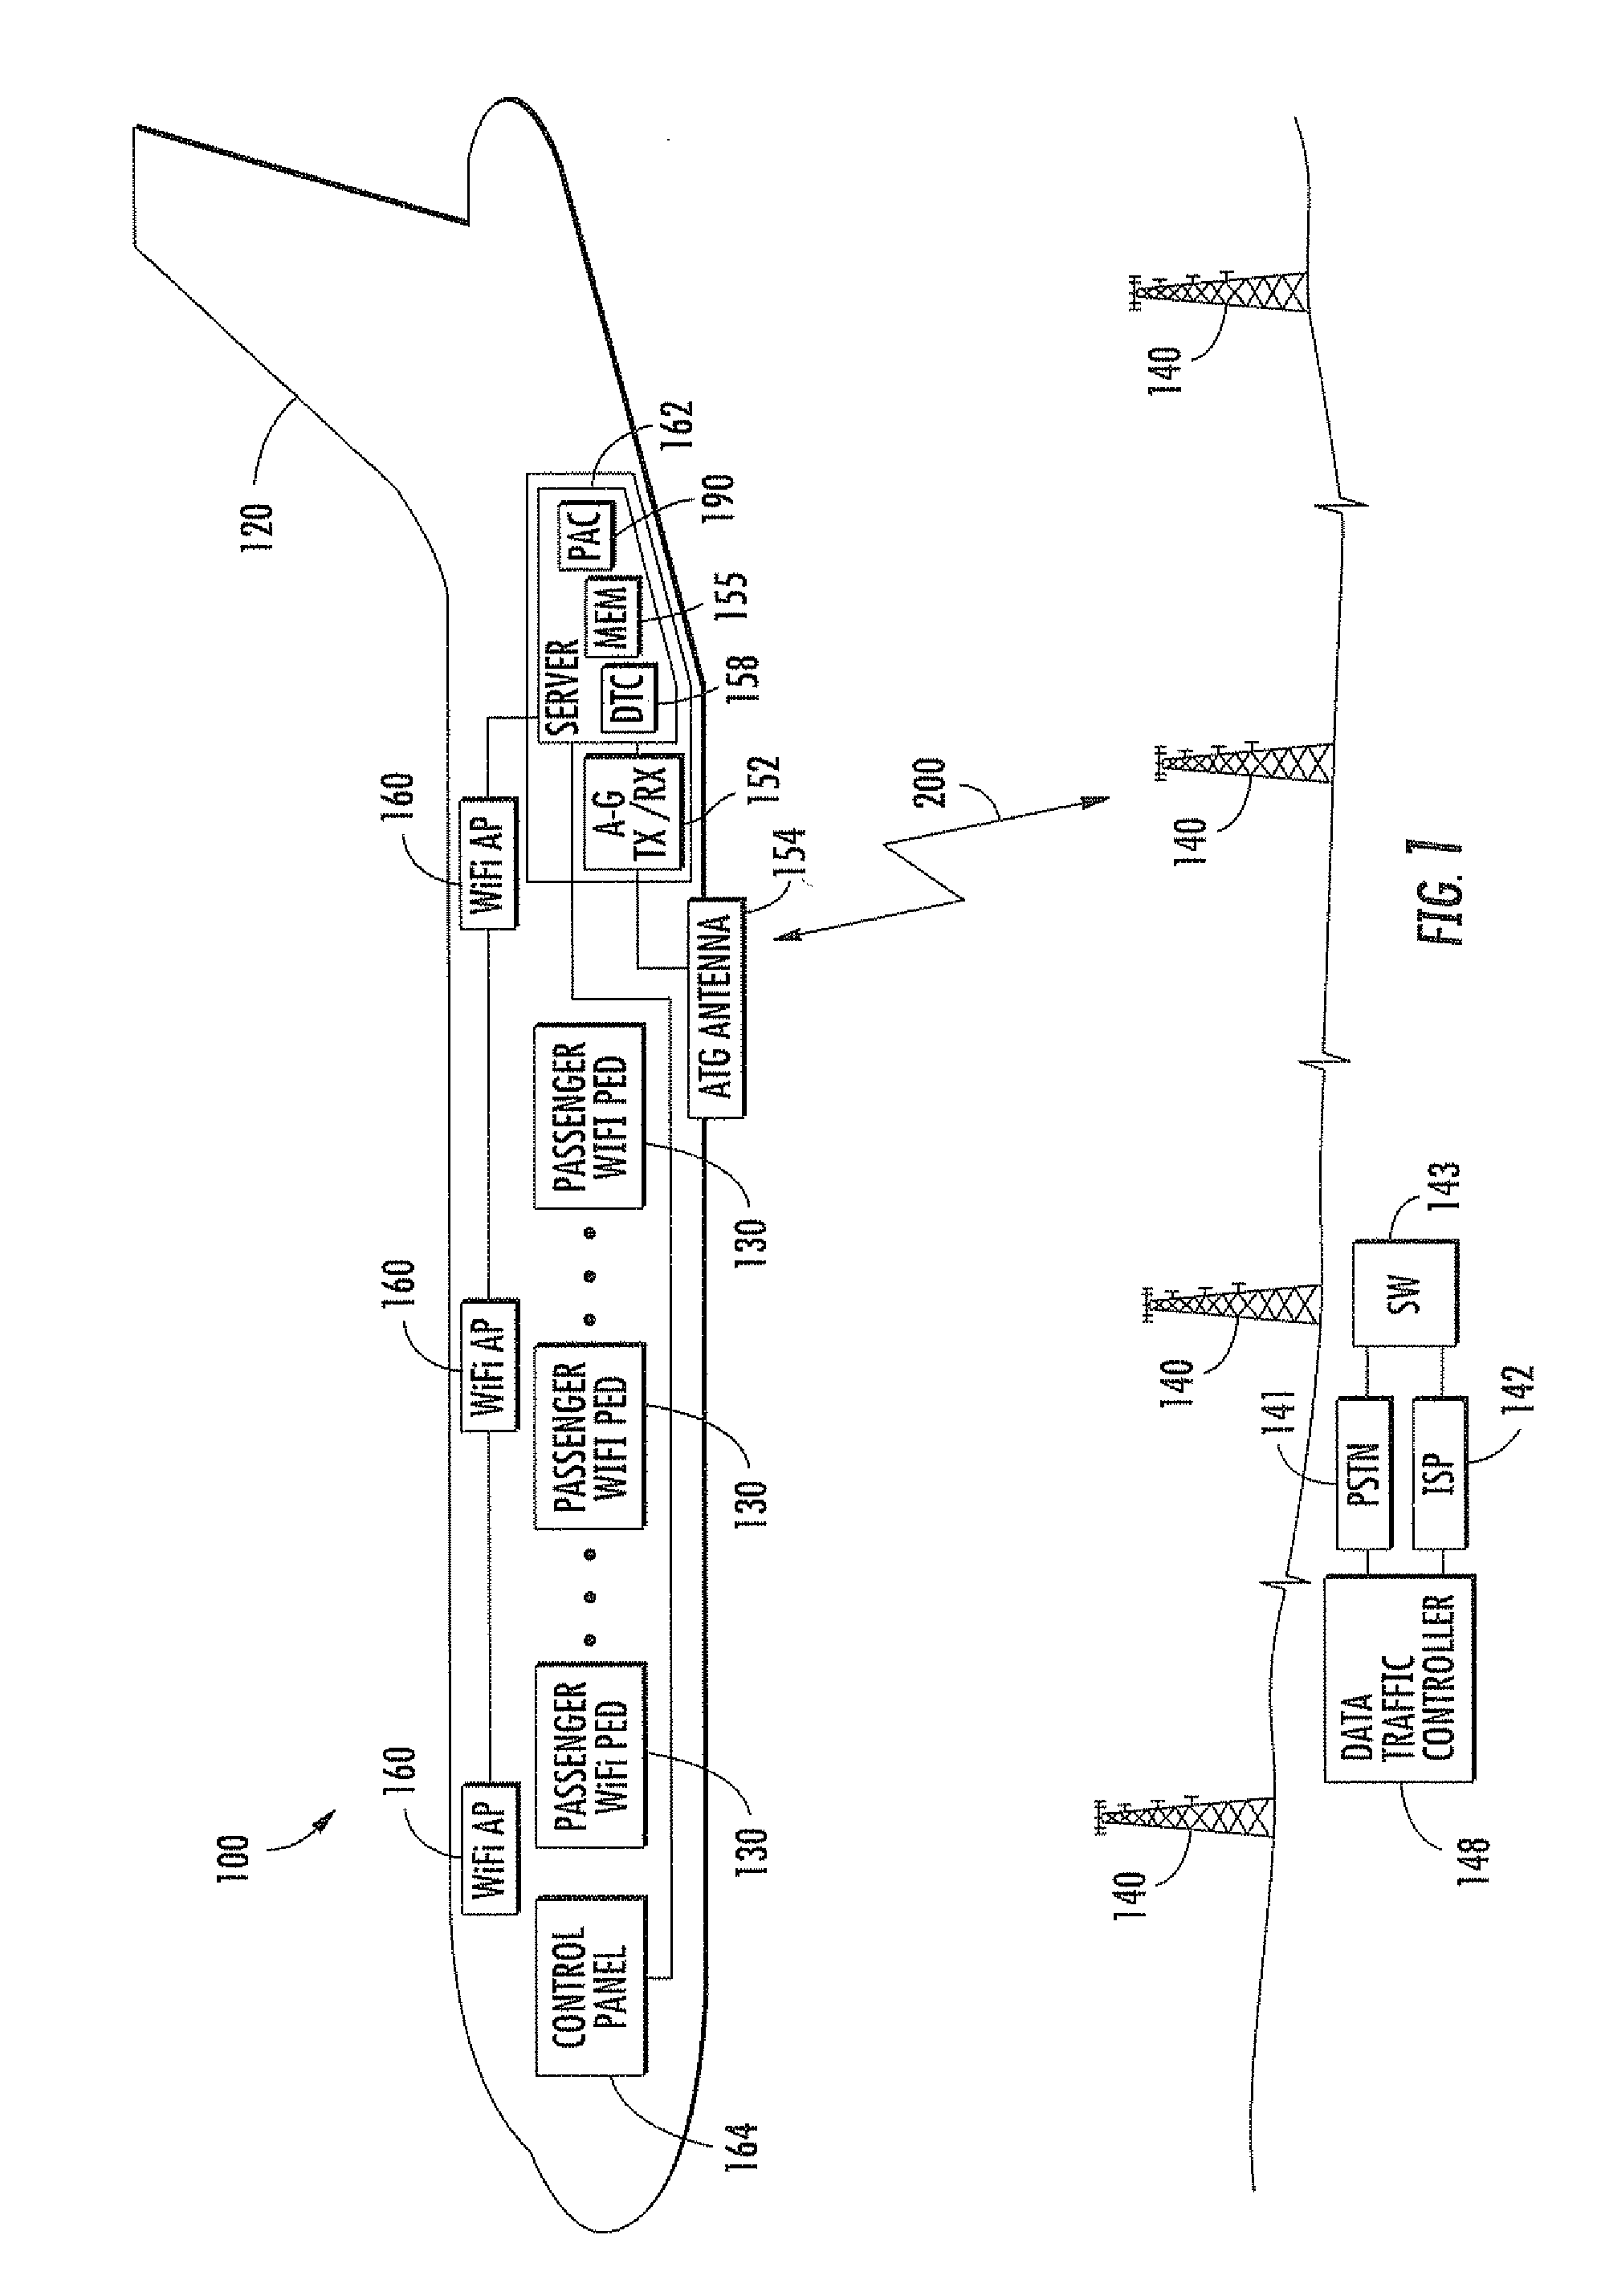 Communications interface device for personal electronic devices (PEDS) operating on a general aviation aircraft and associated methods